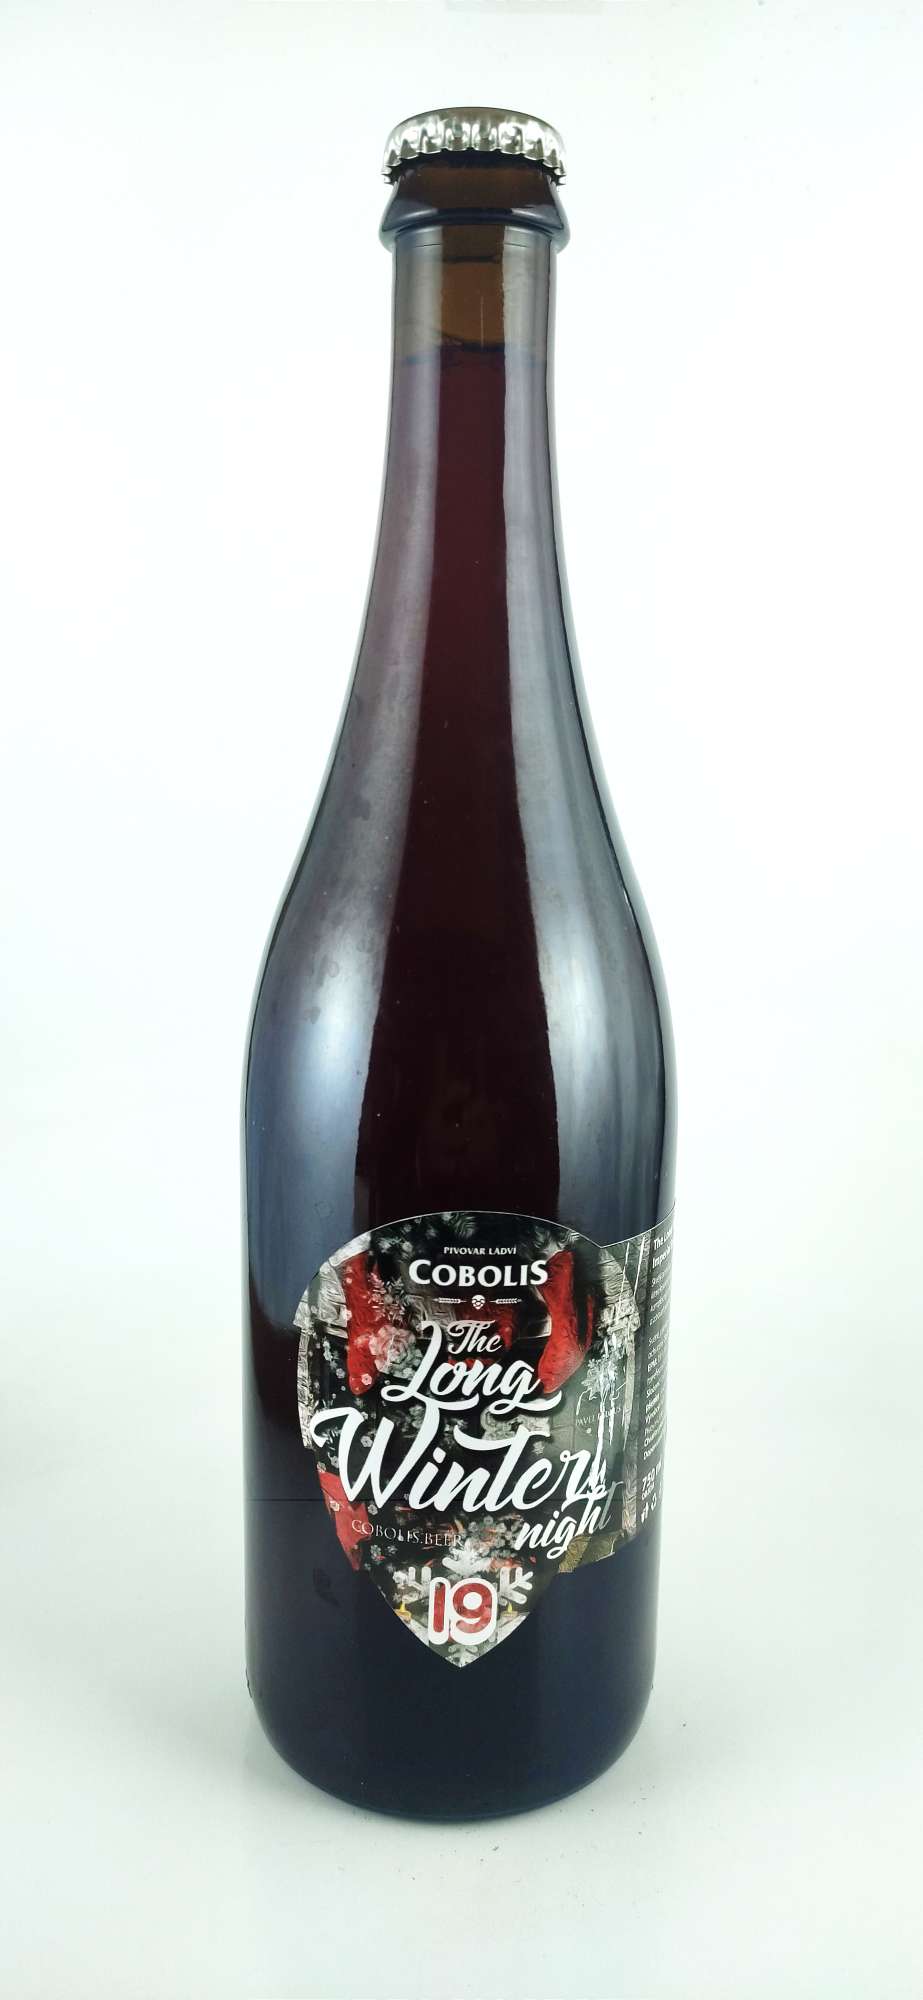 Cobolis The Long winter night Imperial Sour Ale 19°